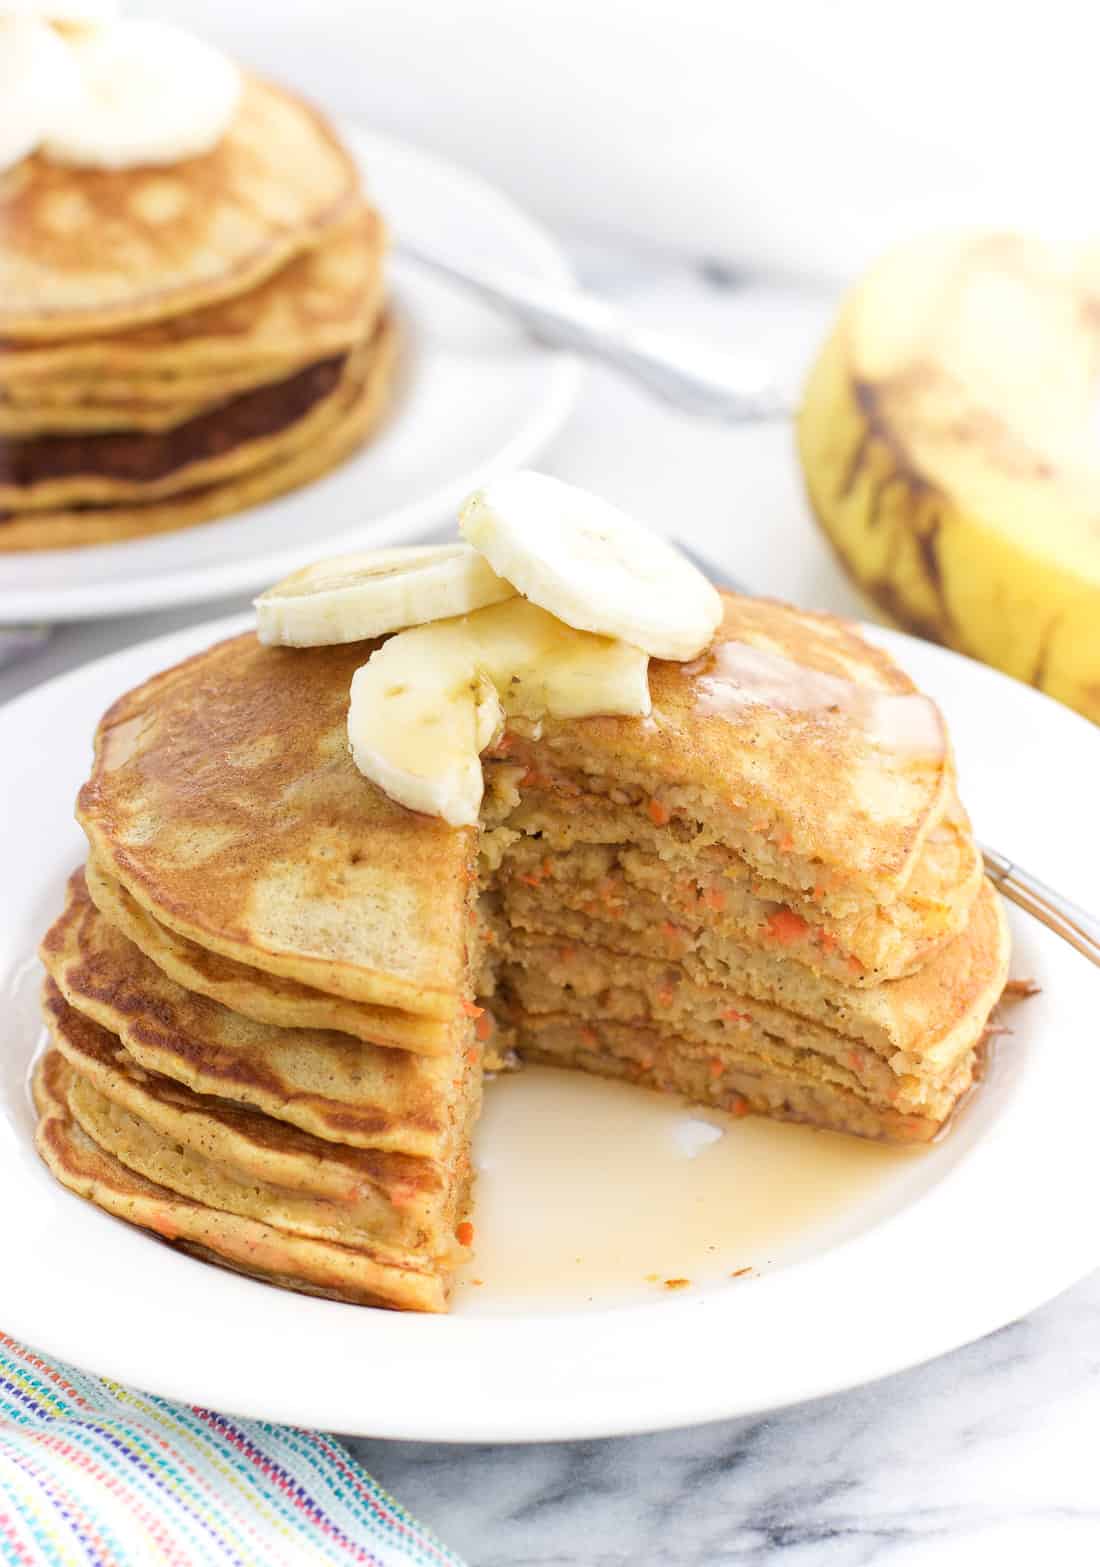 A stack of pancakes topped with banana slices on a plate with a wedge cut out.